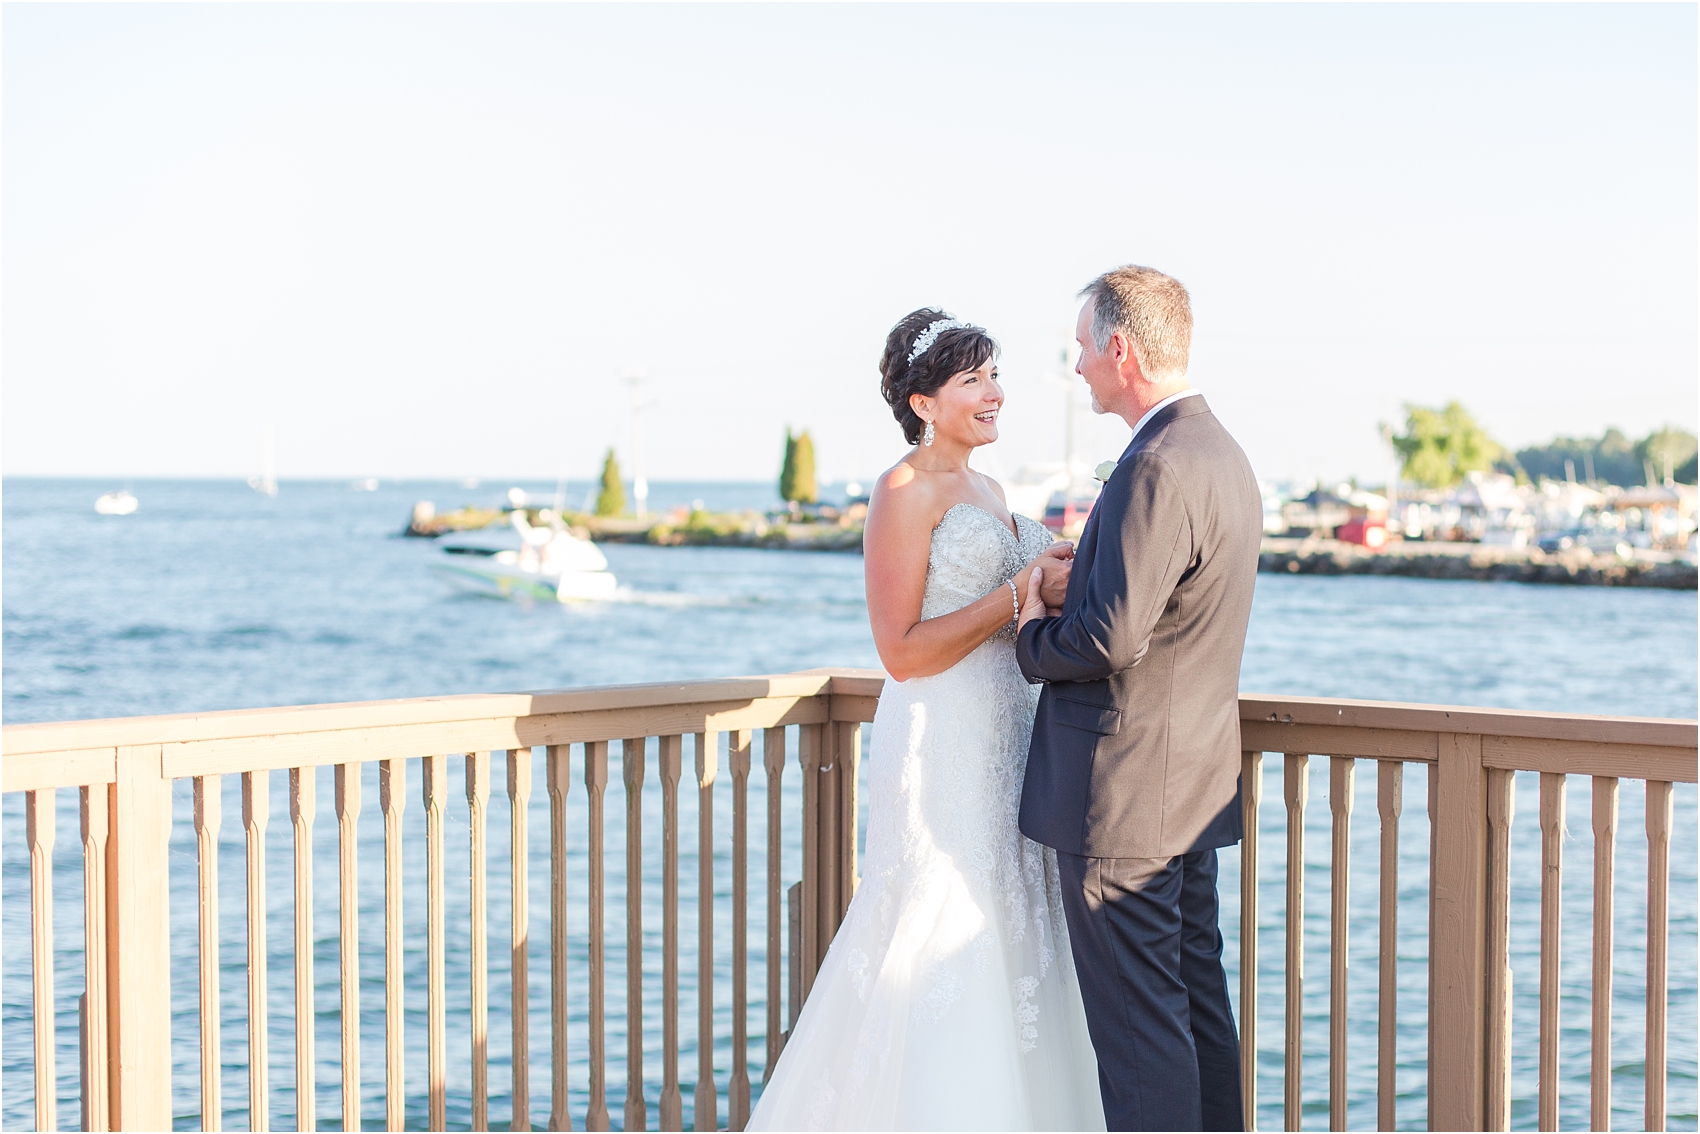 classic-natuical-inspired-wedding-photos-on-infinity-ovation-yacht-in-st-clair-shores-mi-by-courtney-carolyn-photography_0056.jpg